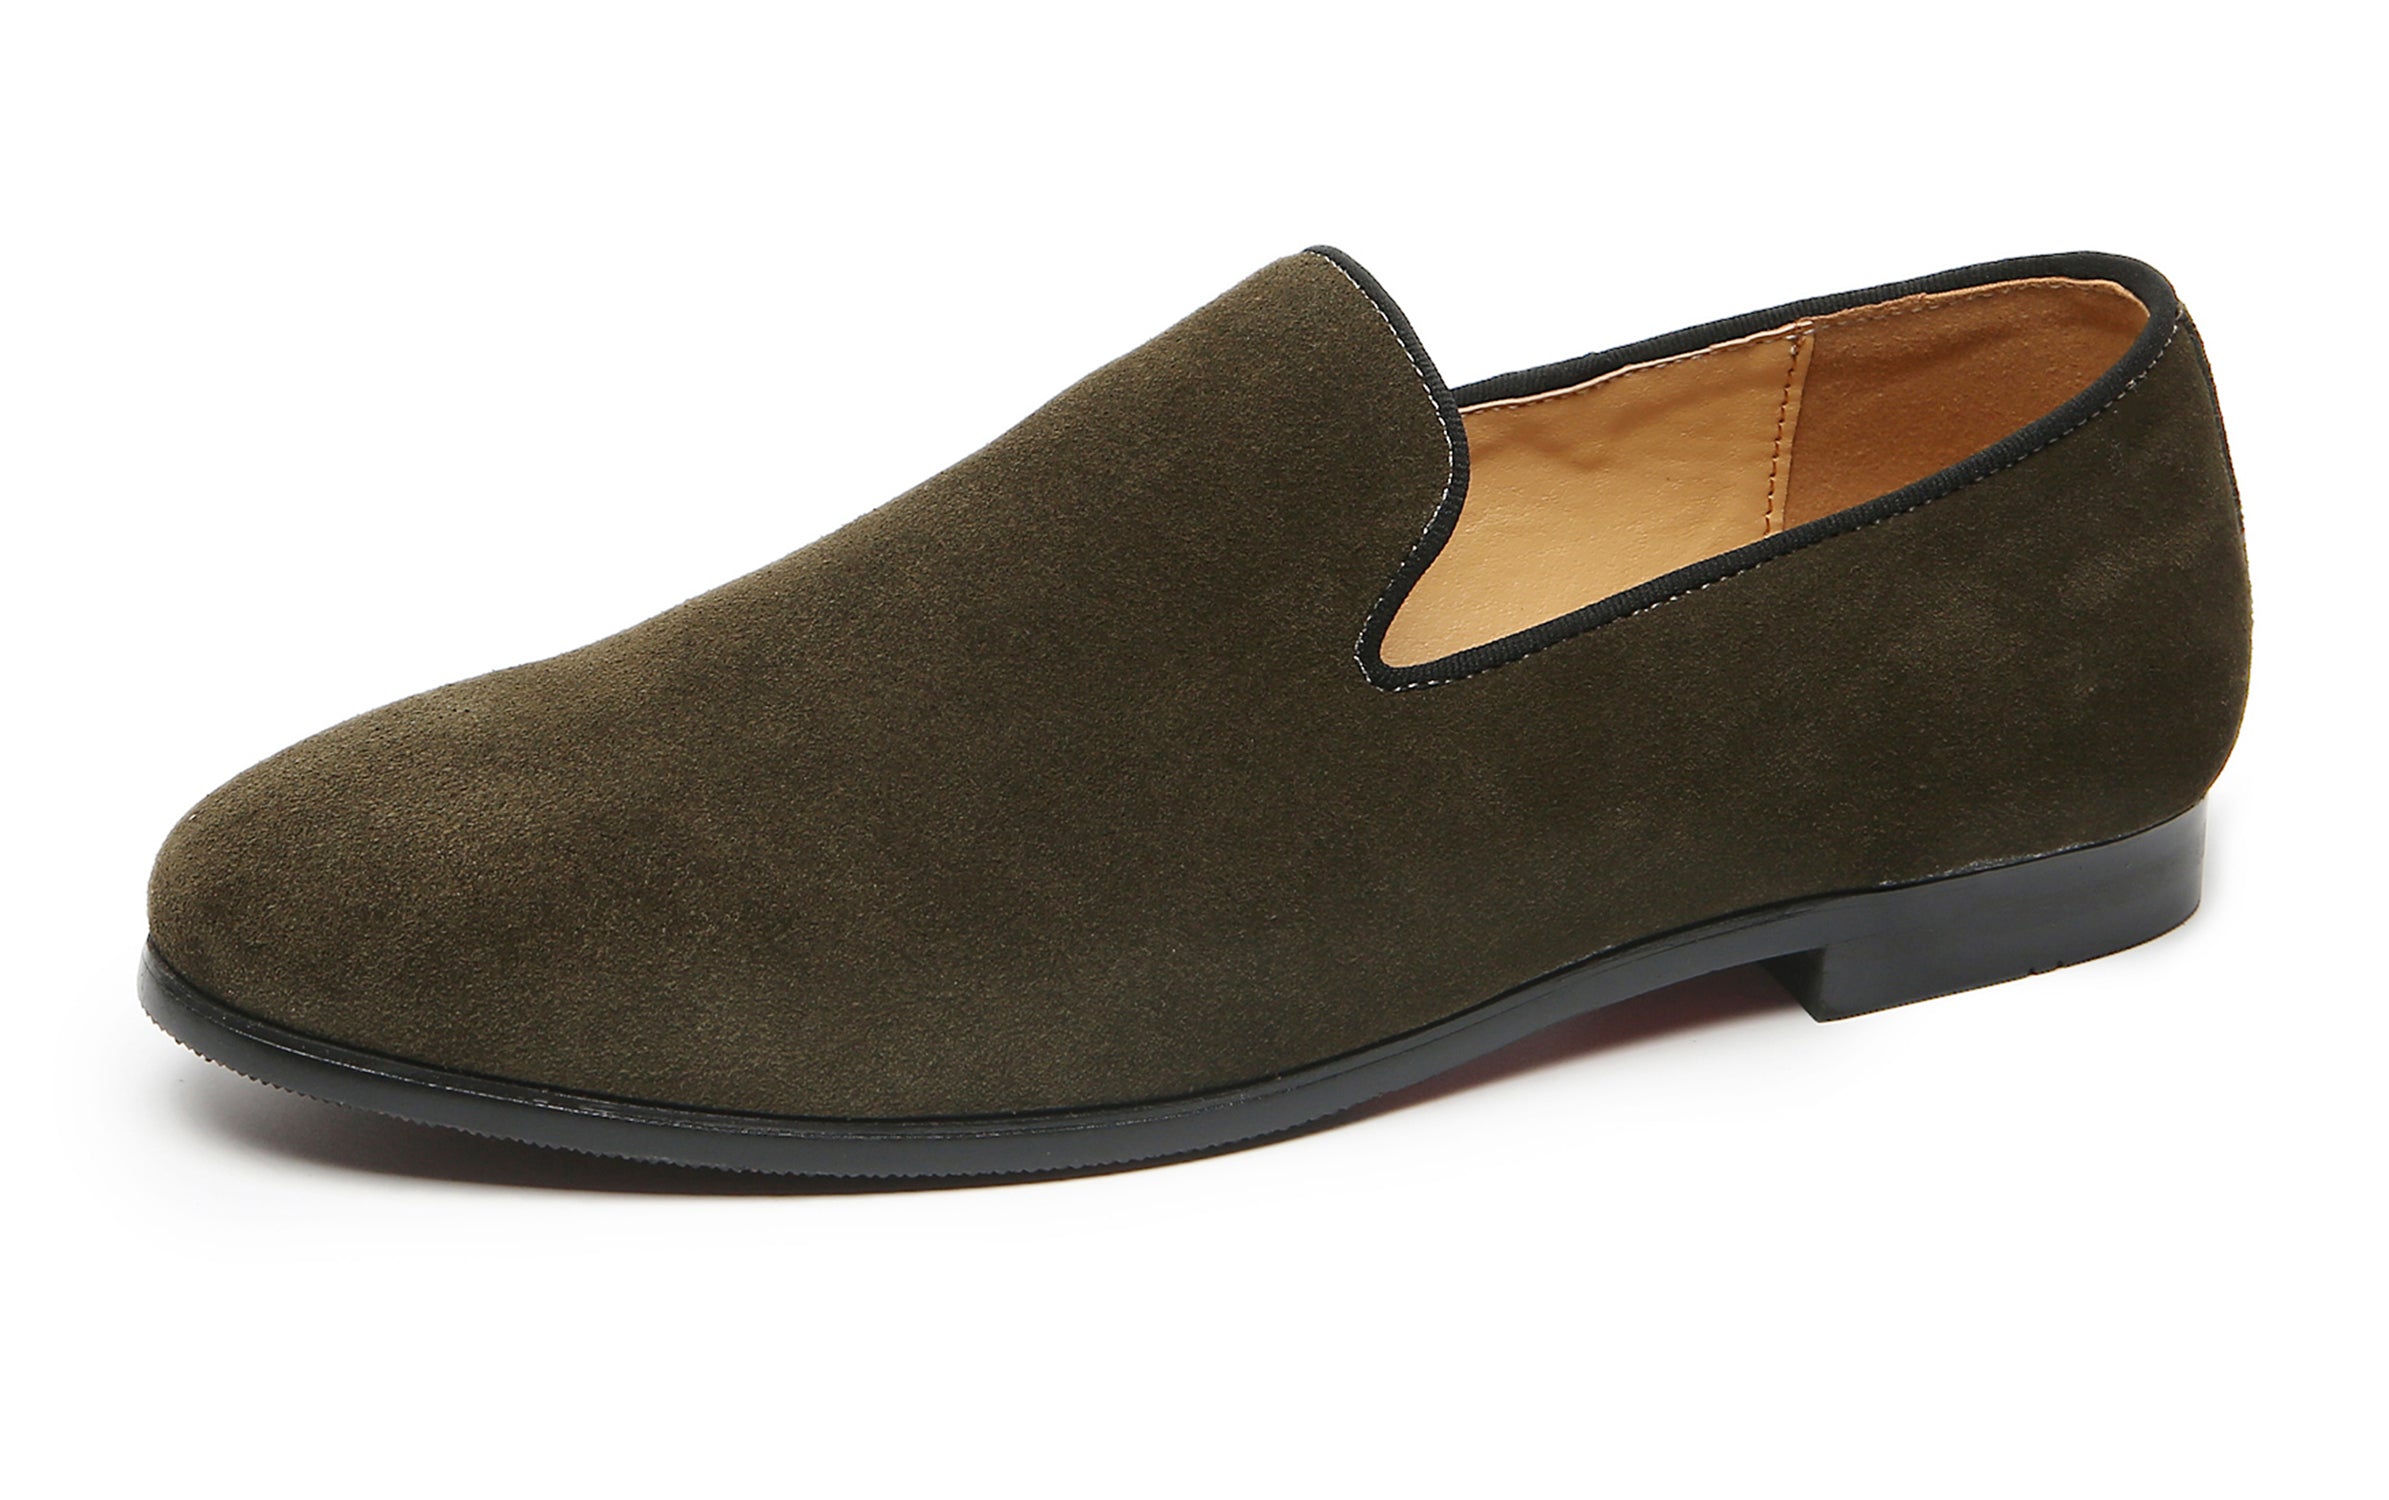 Men's Suede Casual Plain Loafers